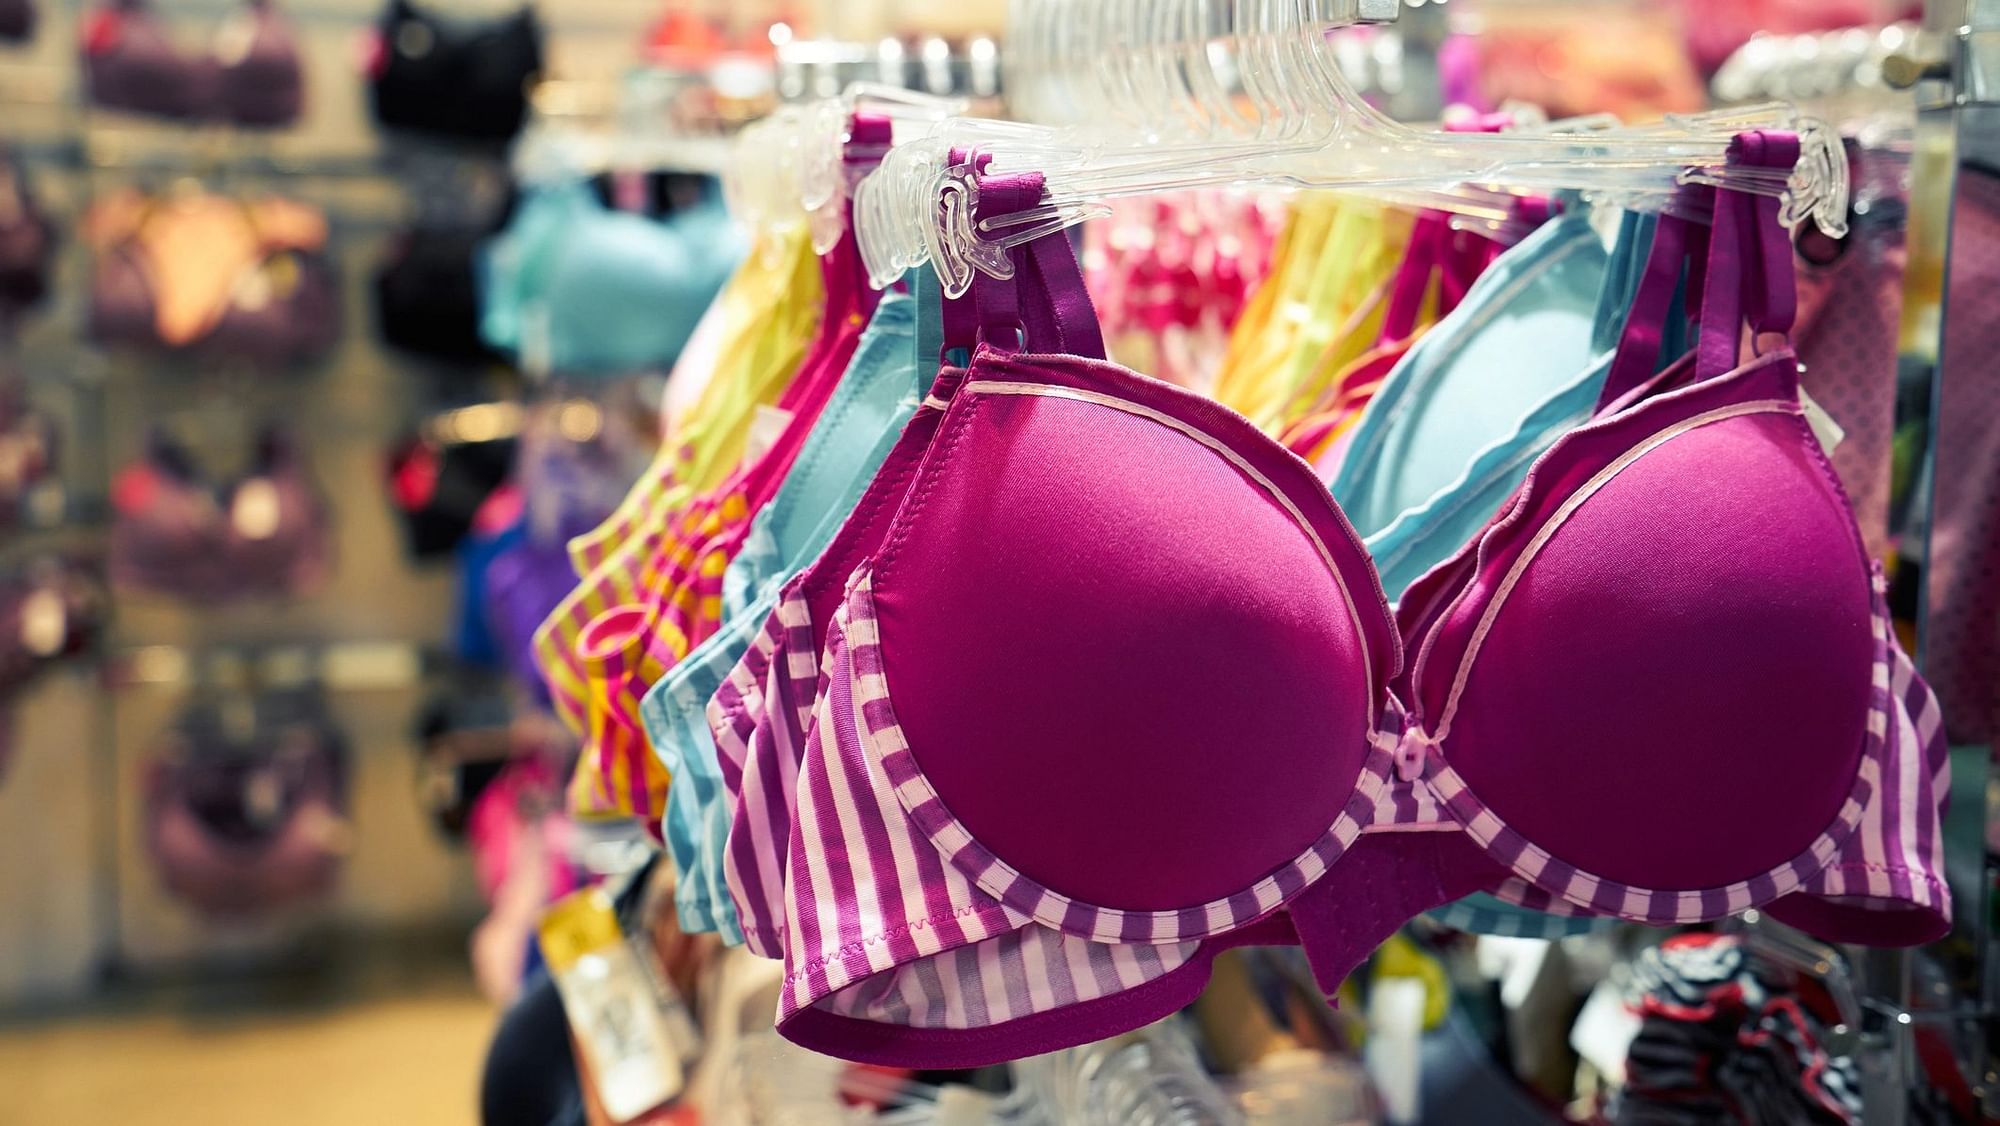 Ill Fitted Bra Health Problems: 80 percent of women wear incorrectly sized bras. How can customized bra-size services help?